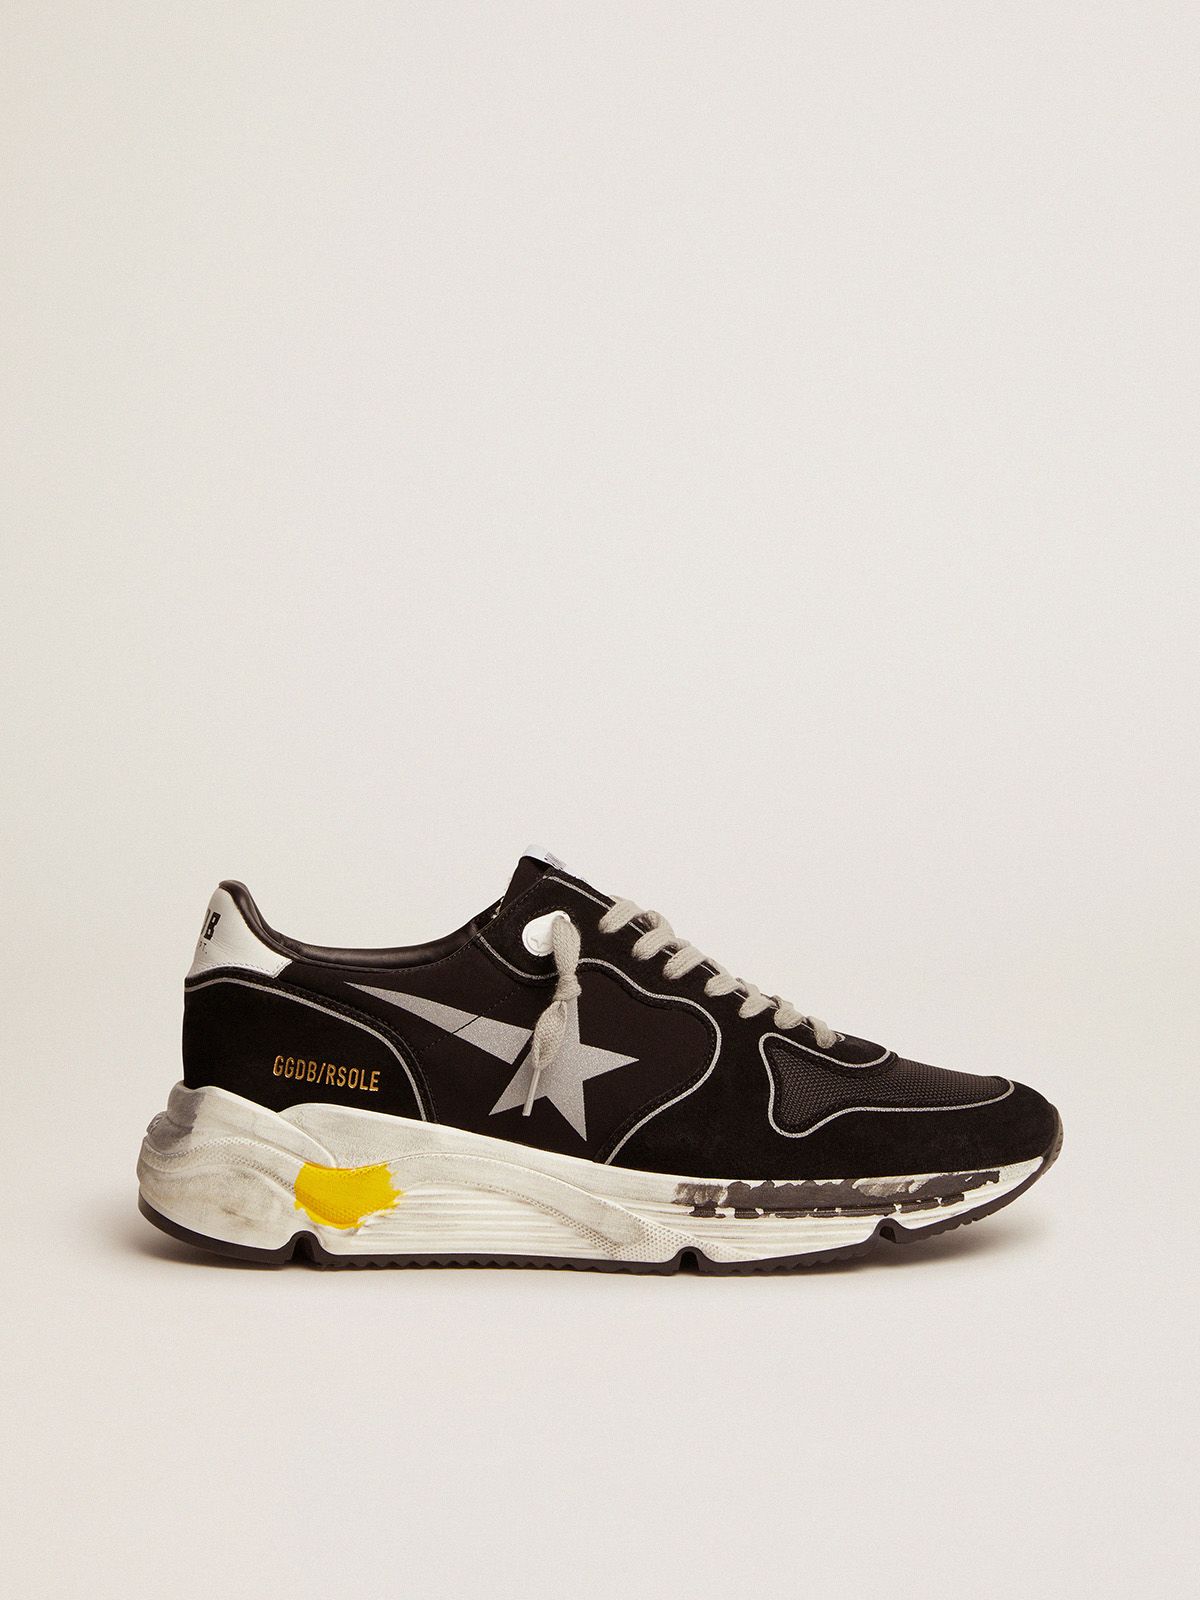 golden goose Sole star sneakers Black silver with Running